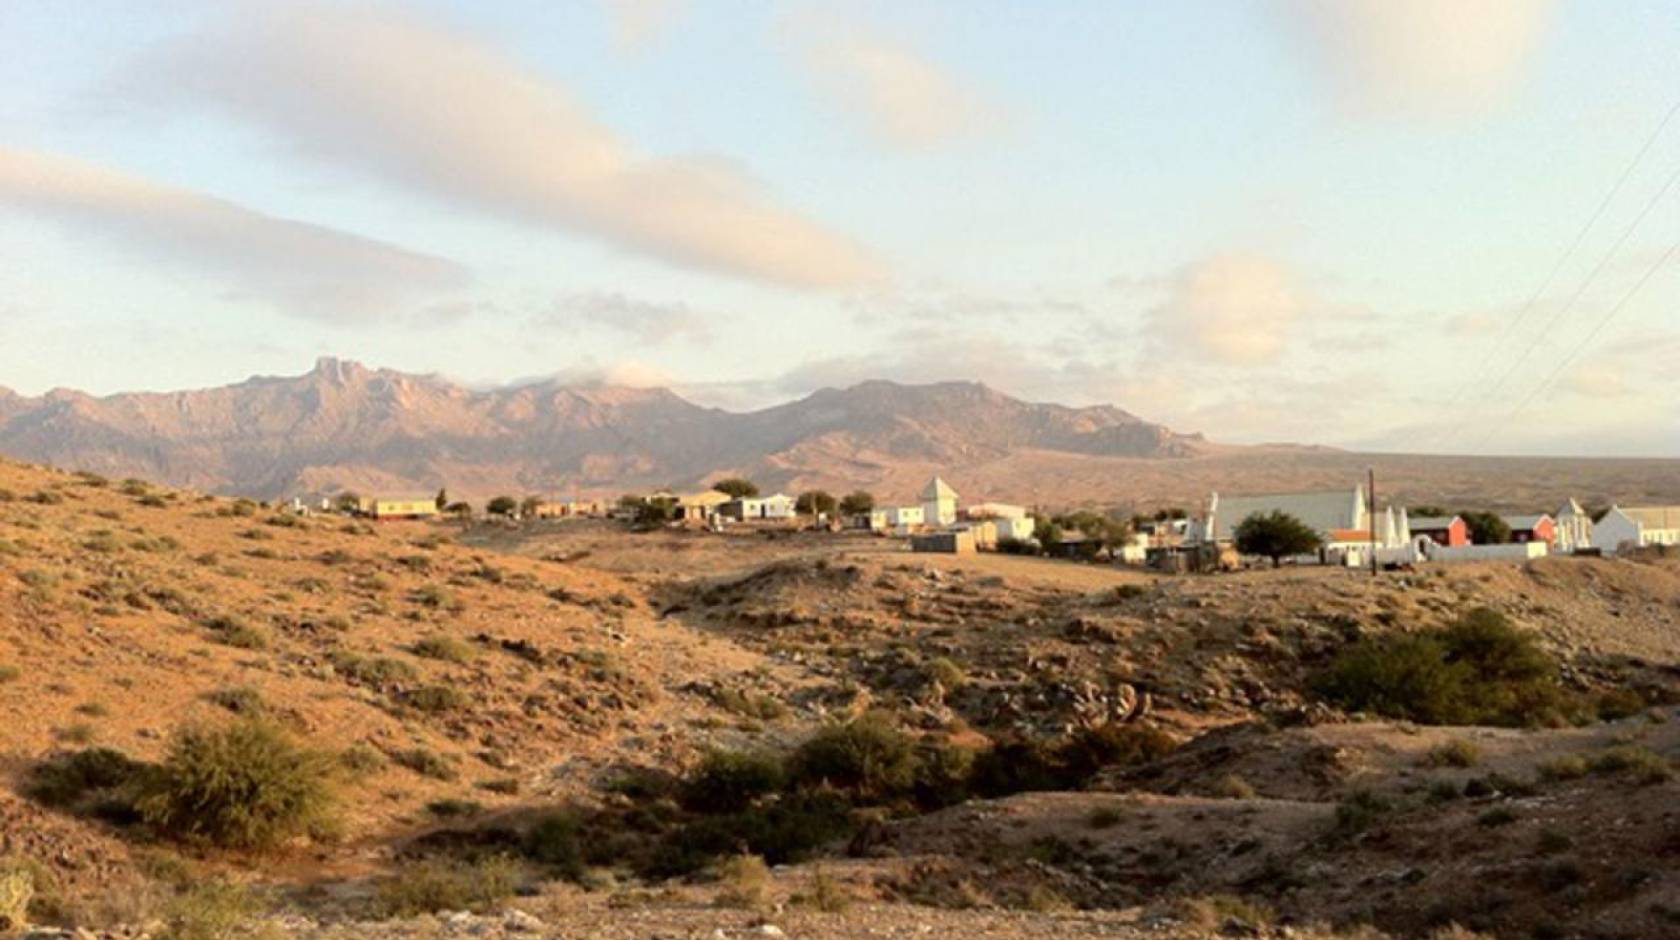 View of the village of Kuboes, on the border of South Africa and Namibia